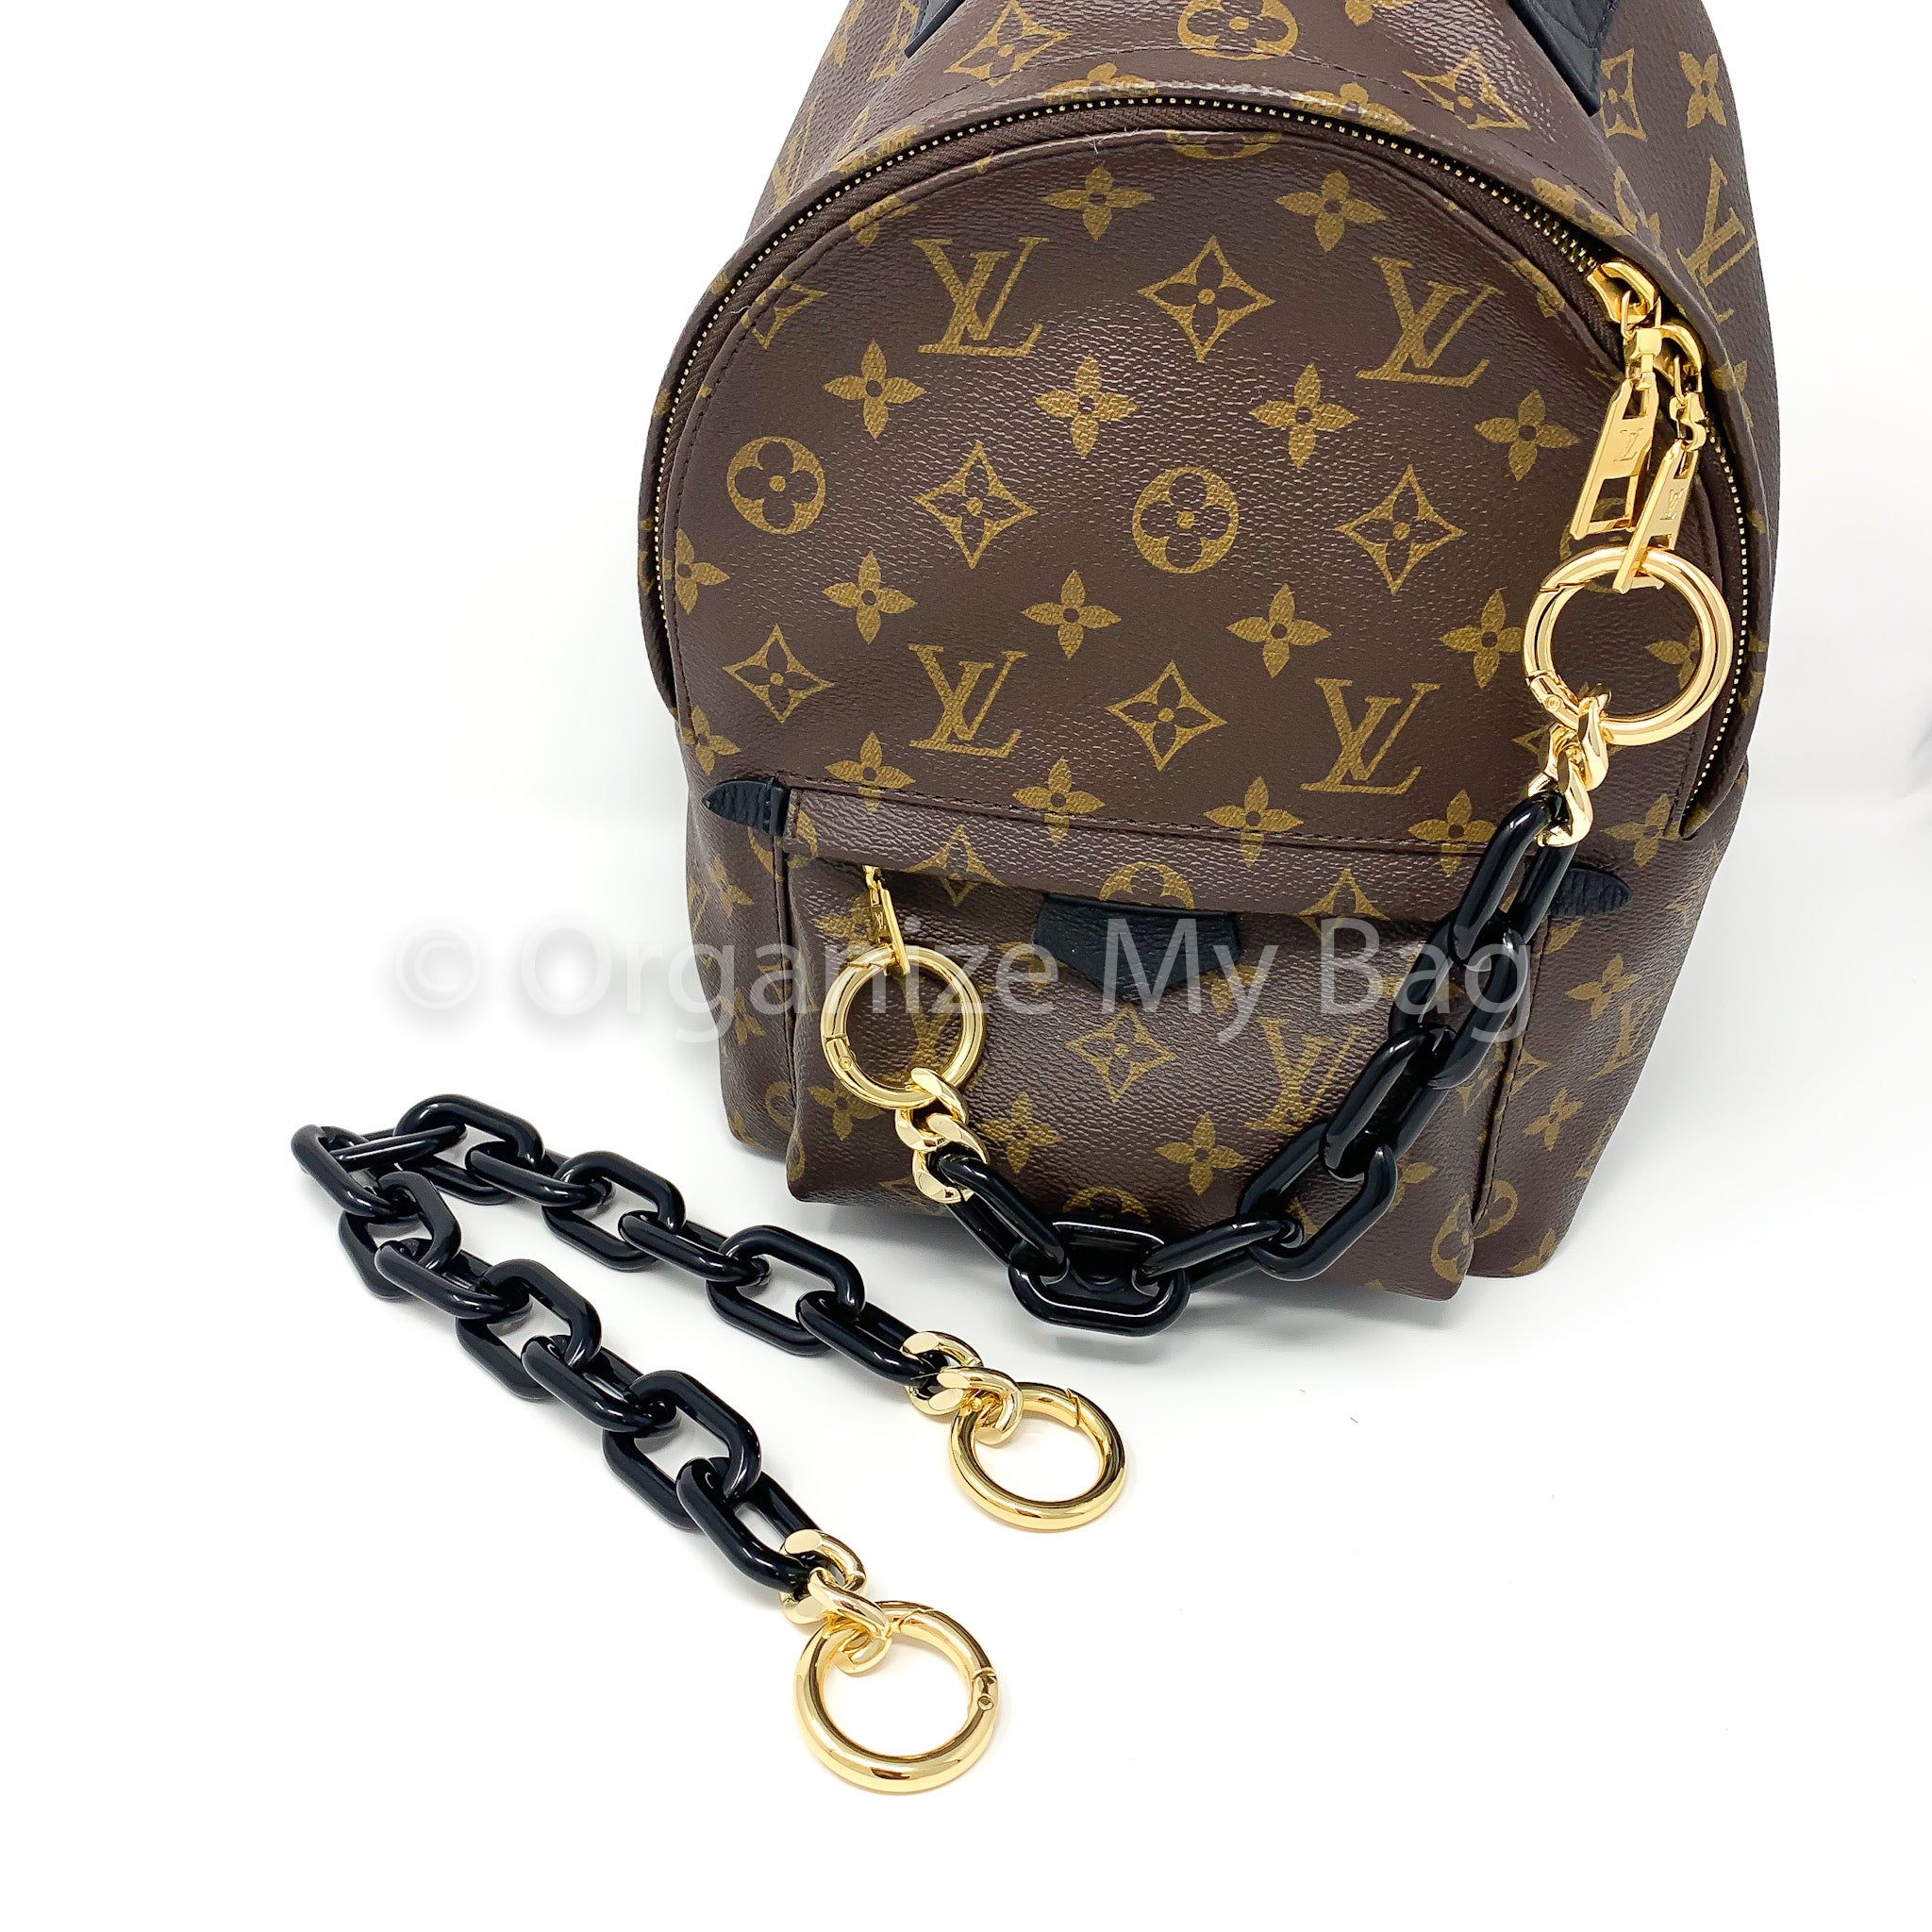 LV Bag with tri-colored Acrylic Chain Link Strap for Sale in Lansing